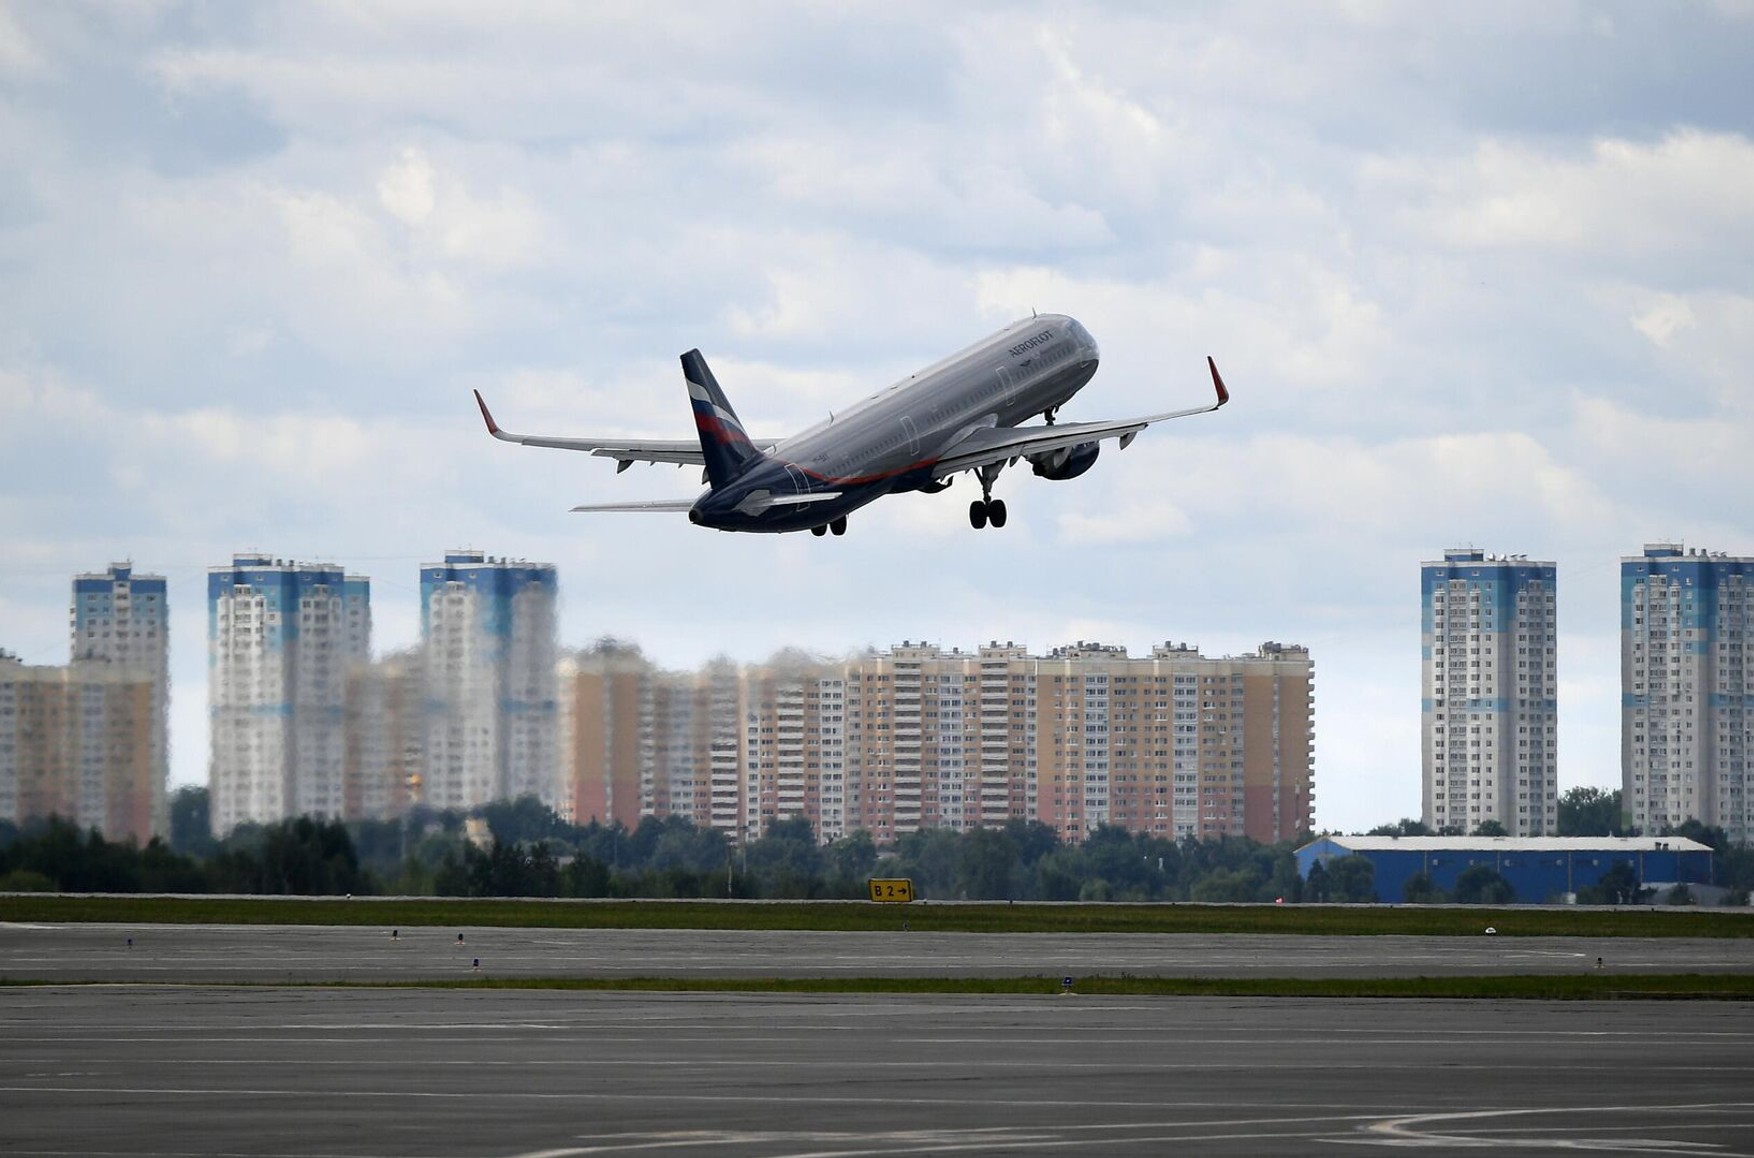 Aeroflot and other carriers are asking to be allowed to Aeroflot and other carriers are asking to be allowed to increase aircraft maintenance intervals due to sanctions